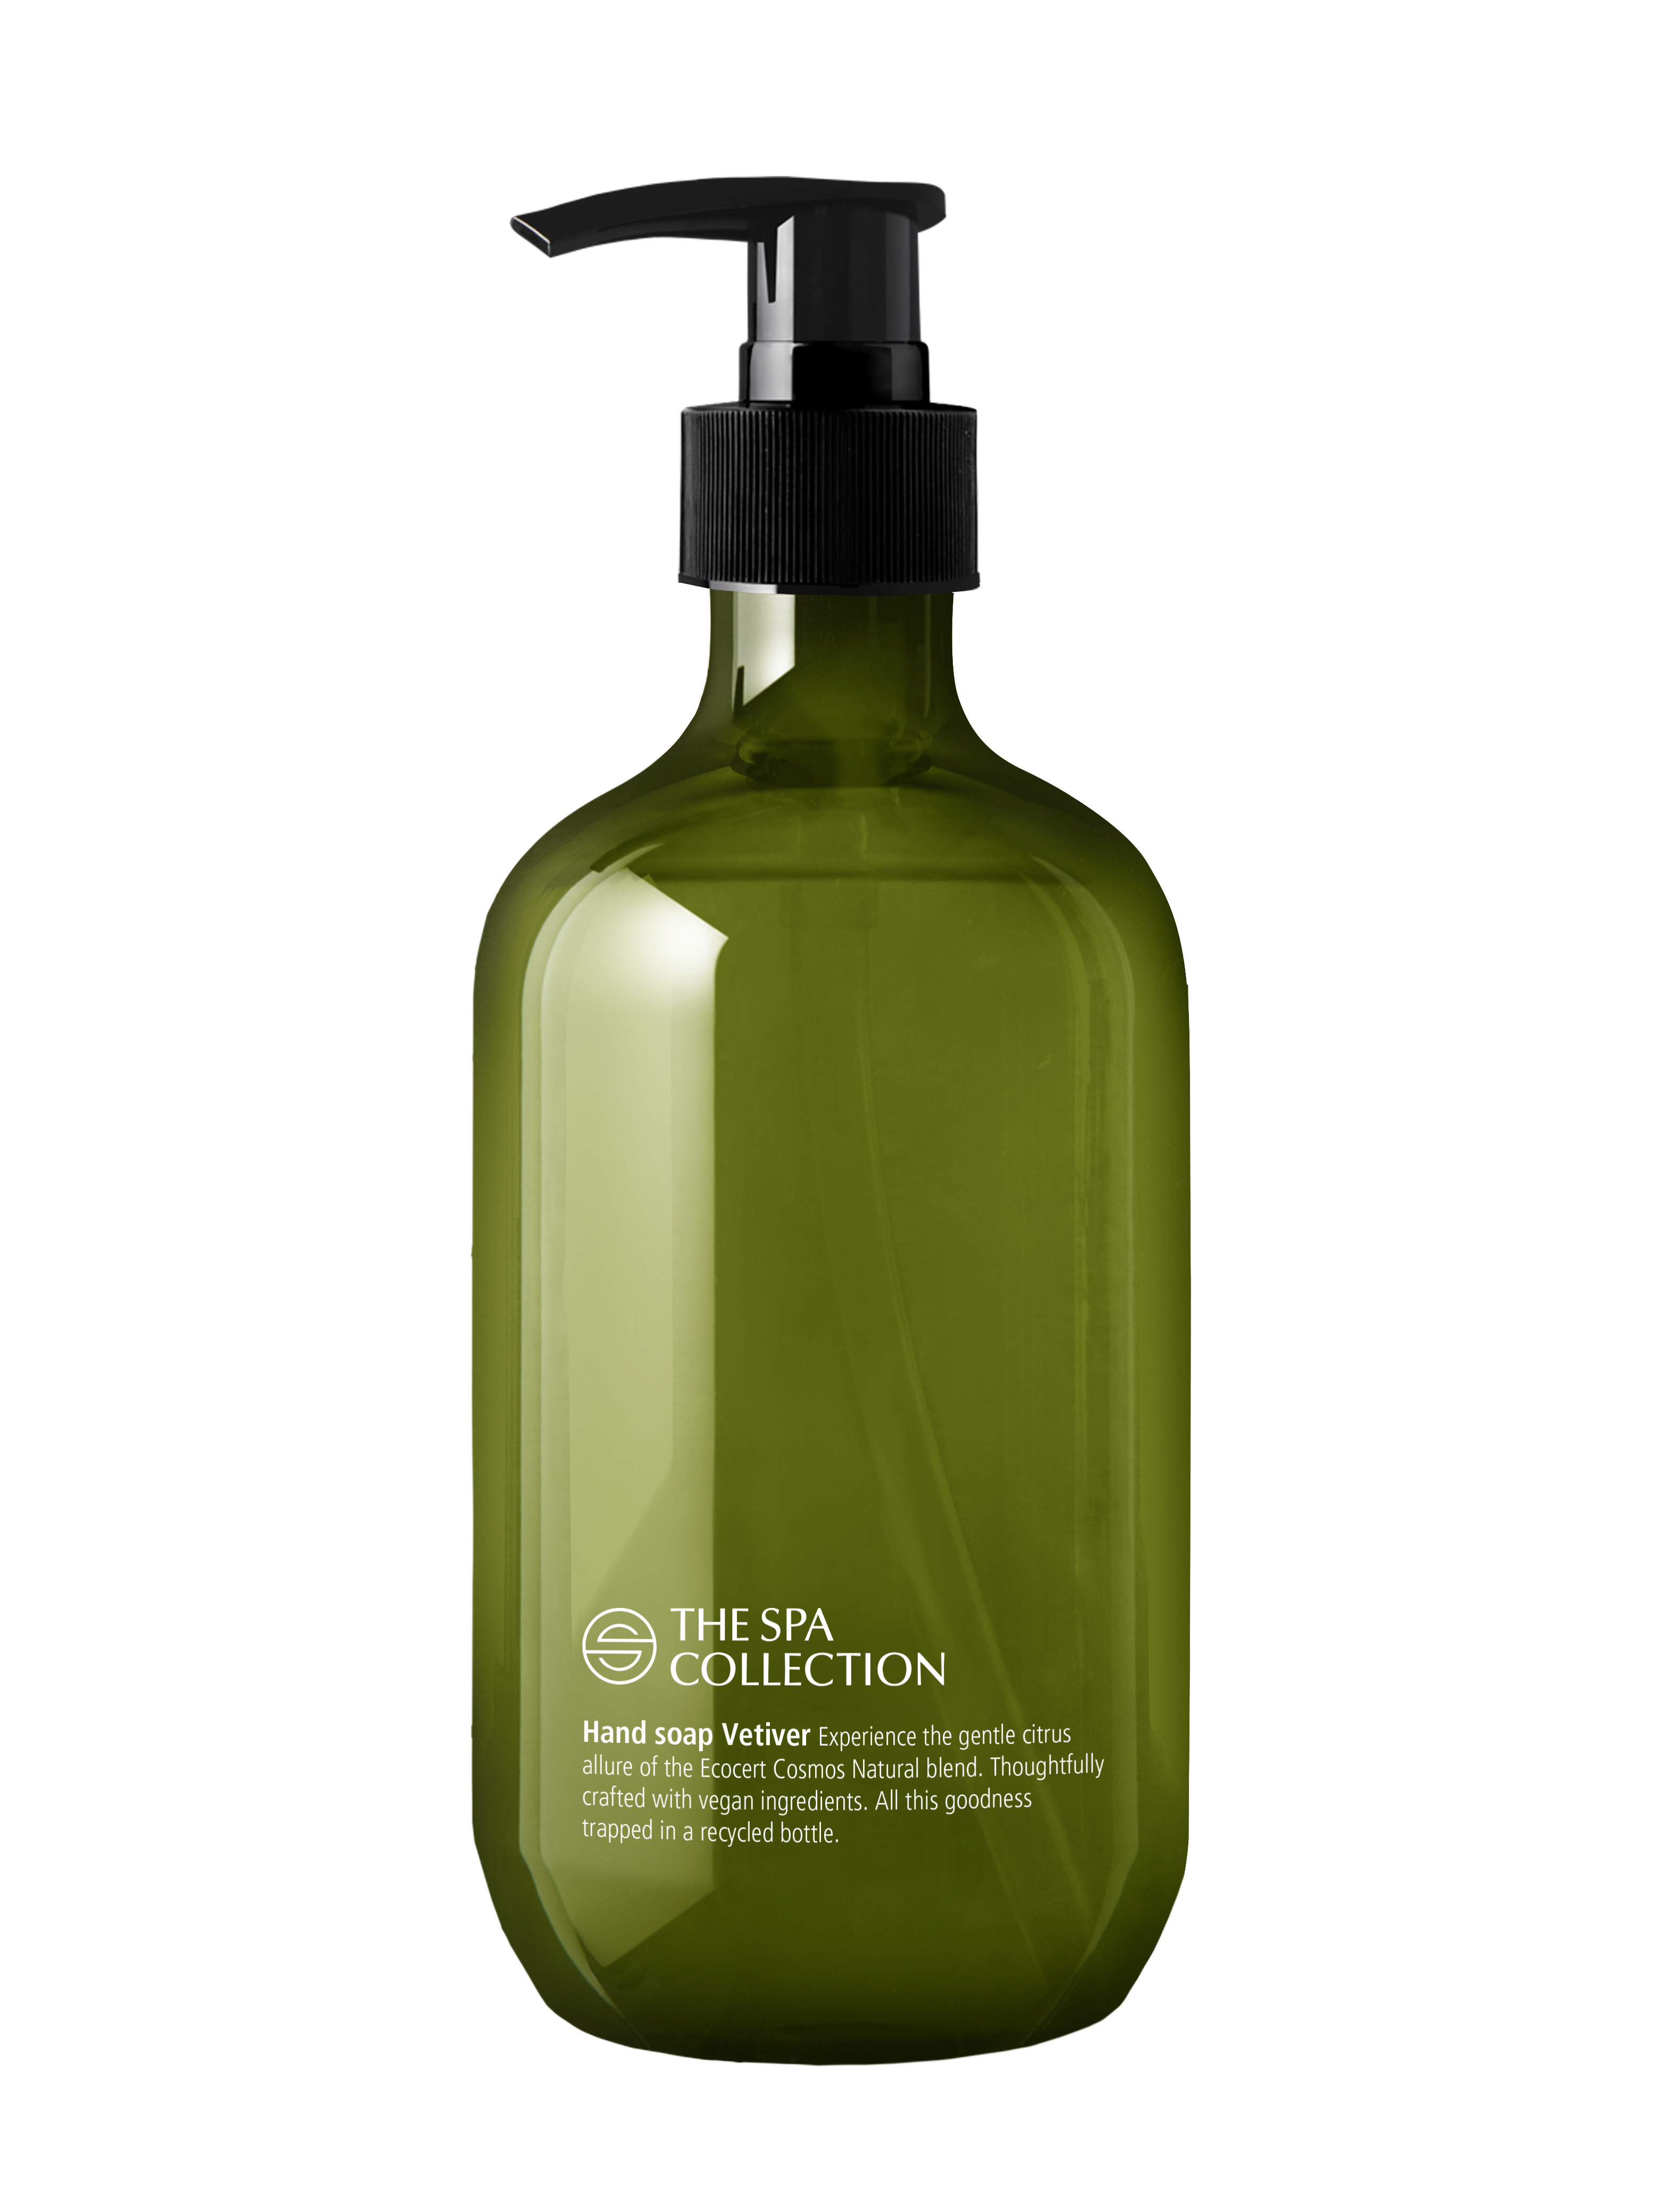 Hand soap ecocert - 475ml recycled bottle - The Spa Collection Vetiver